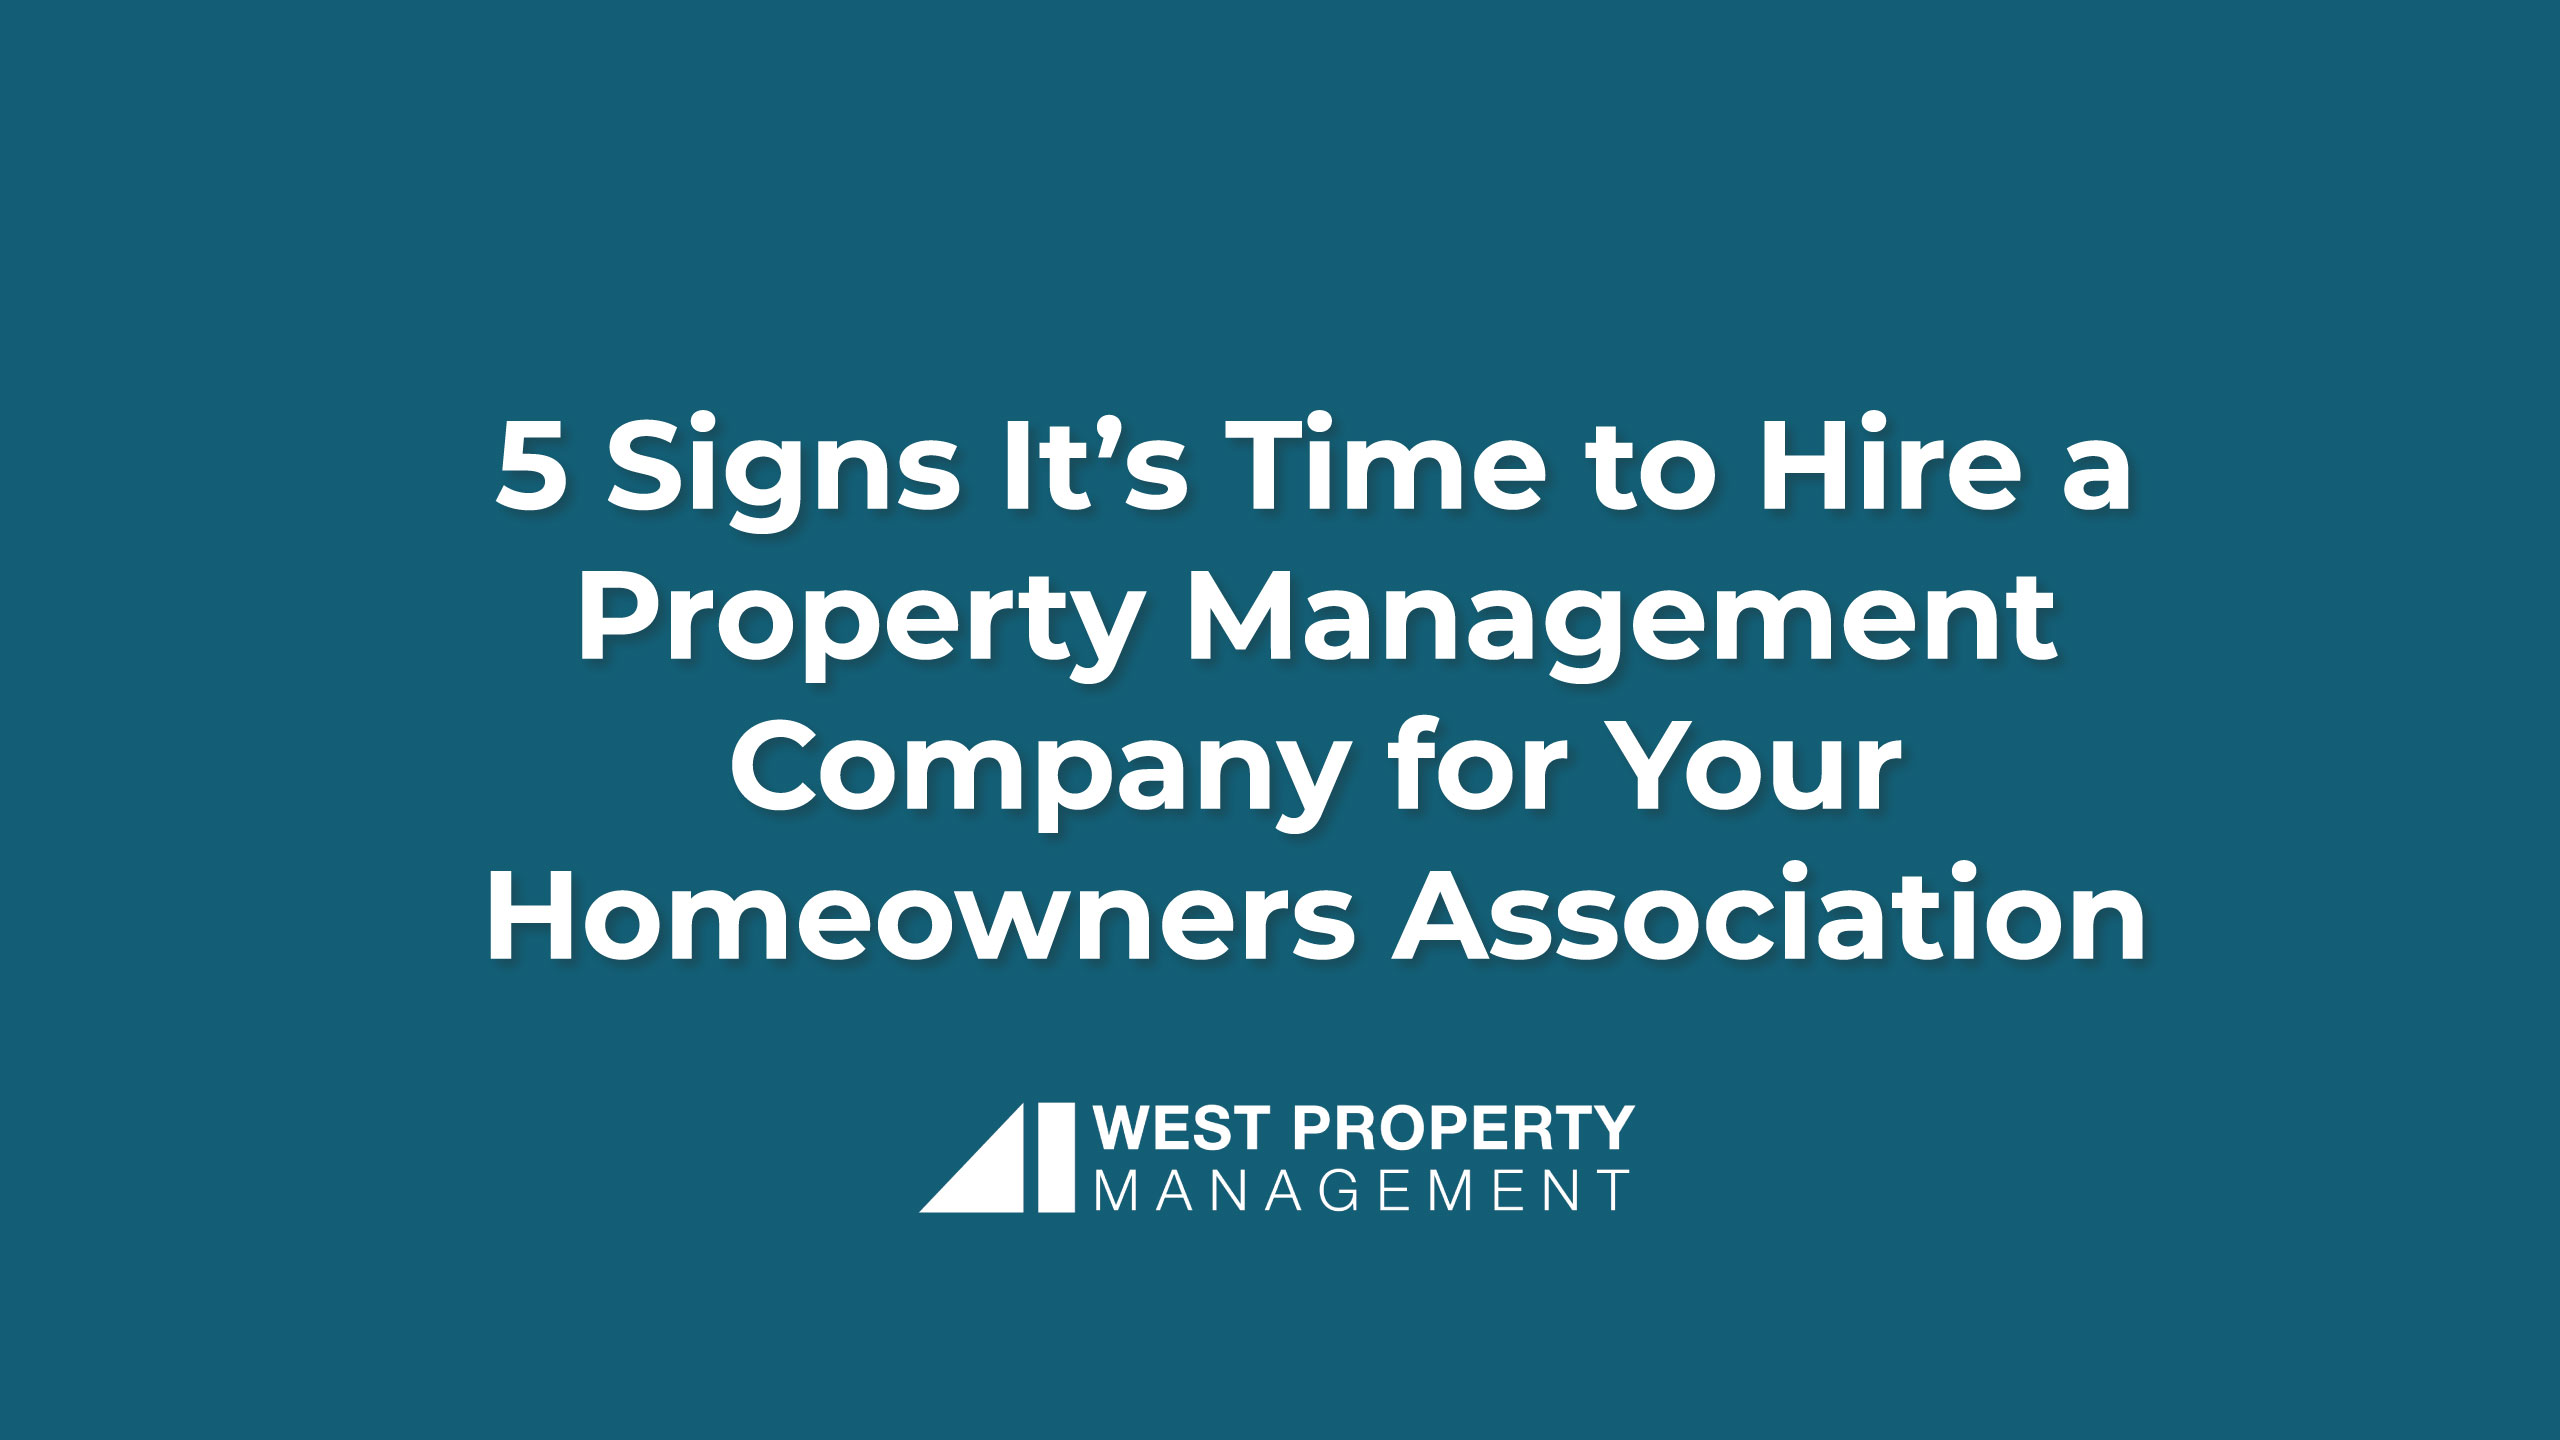 5 Signs It’s Time to Hire a Property Management Company for Your Homeowners Association